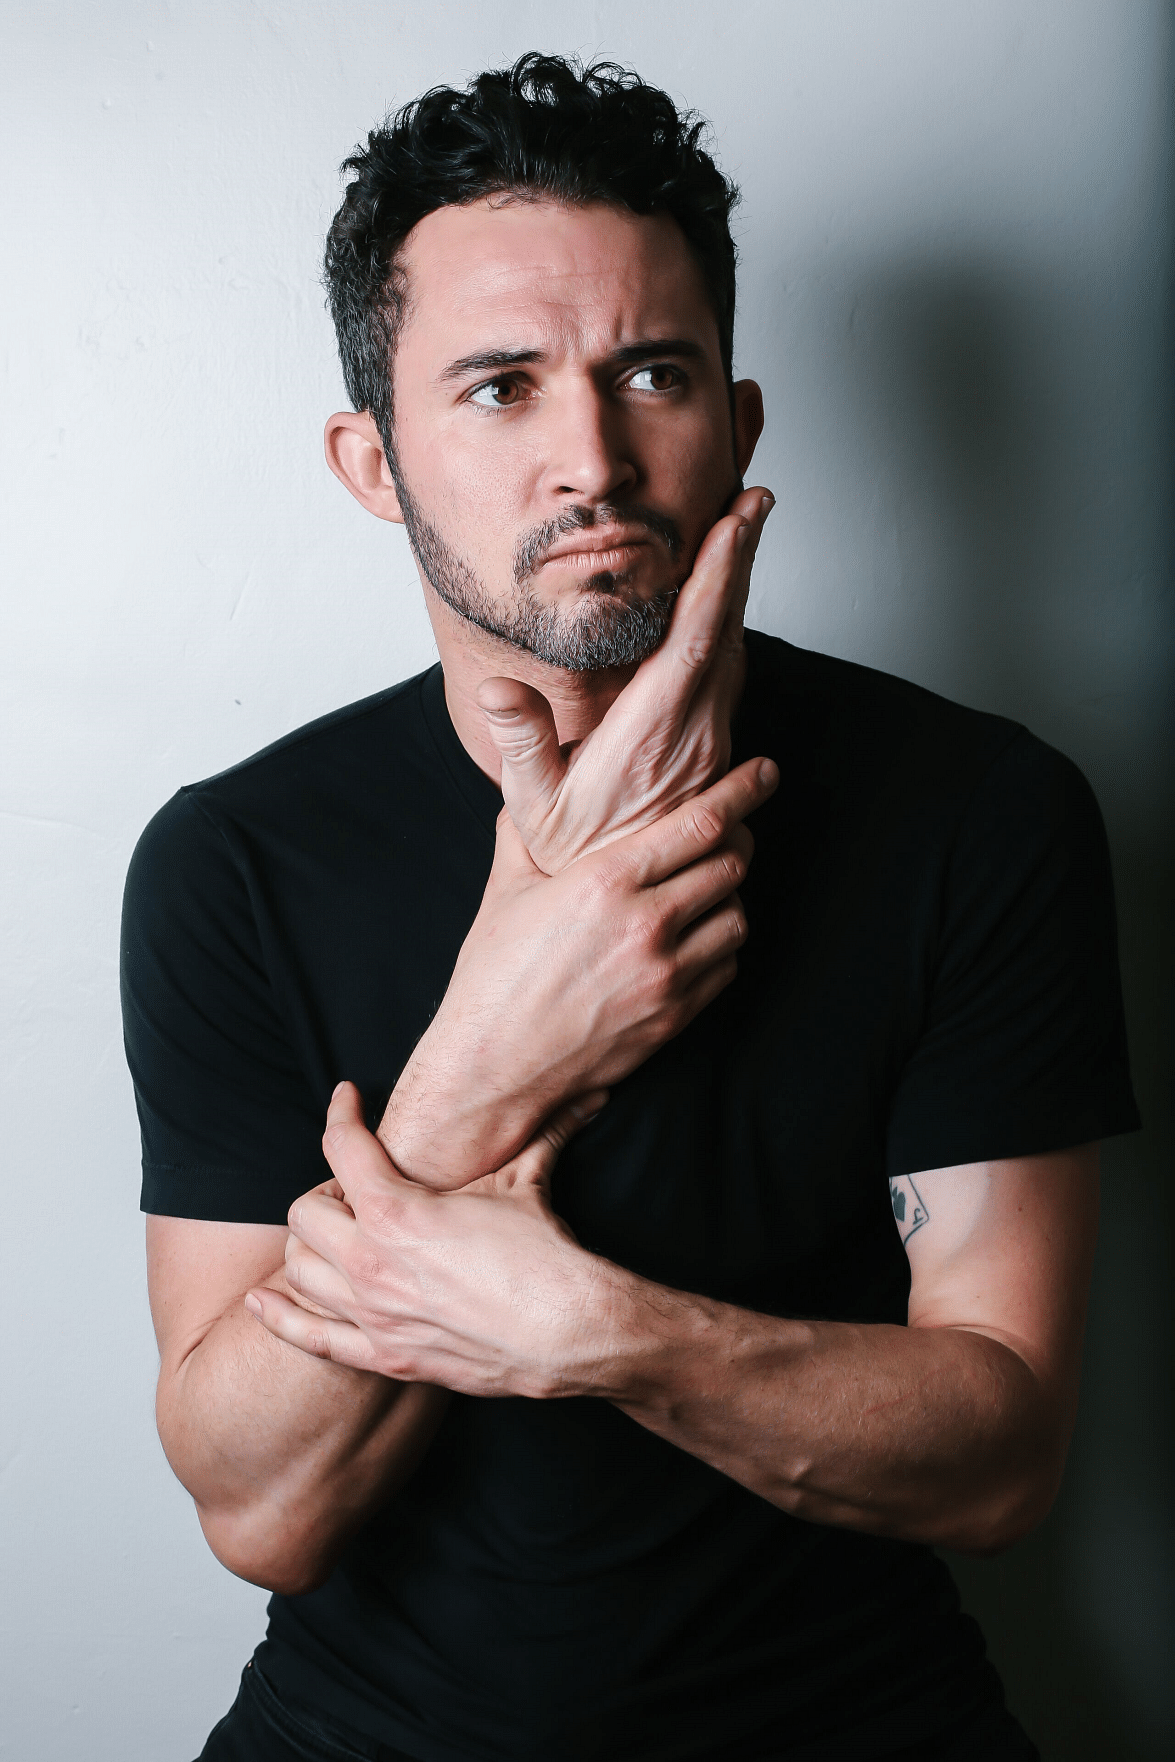 magician Justin Willman from netflix's magic for humans